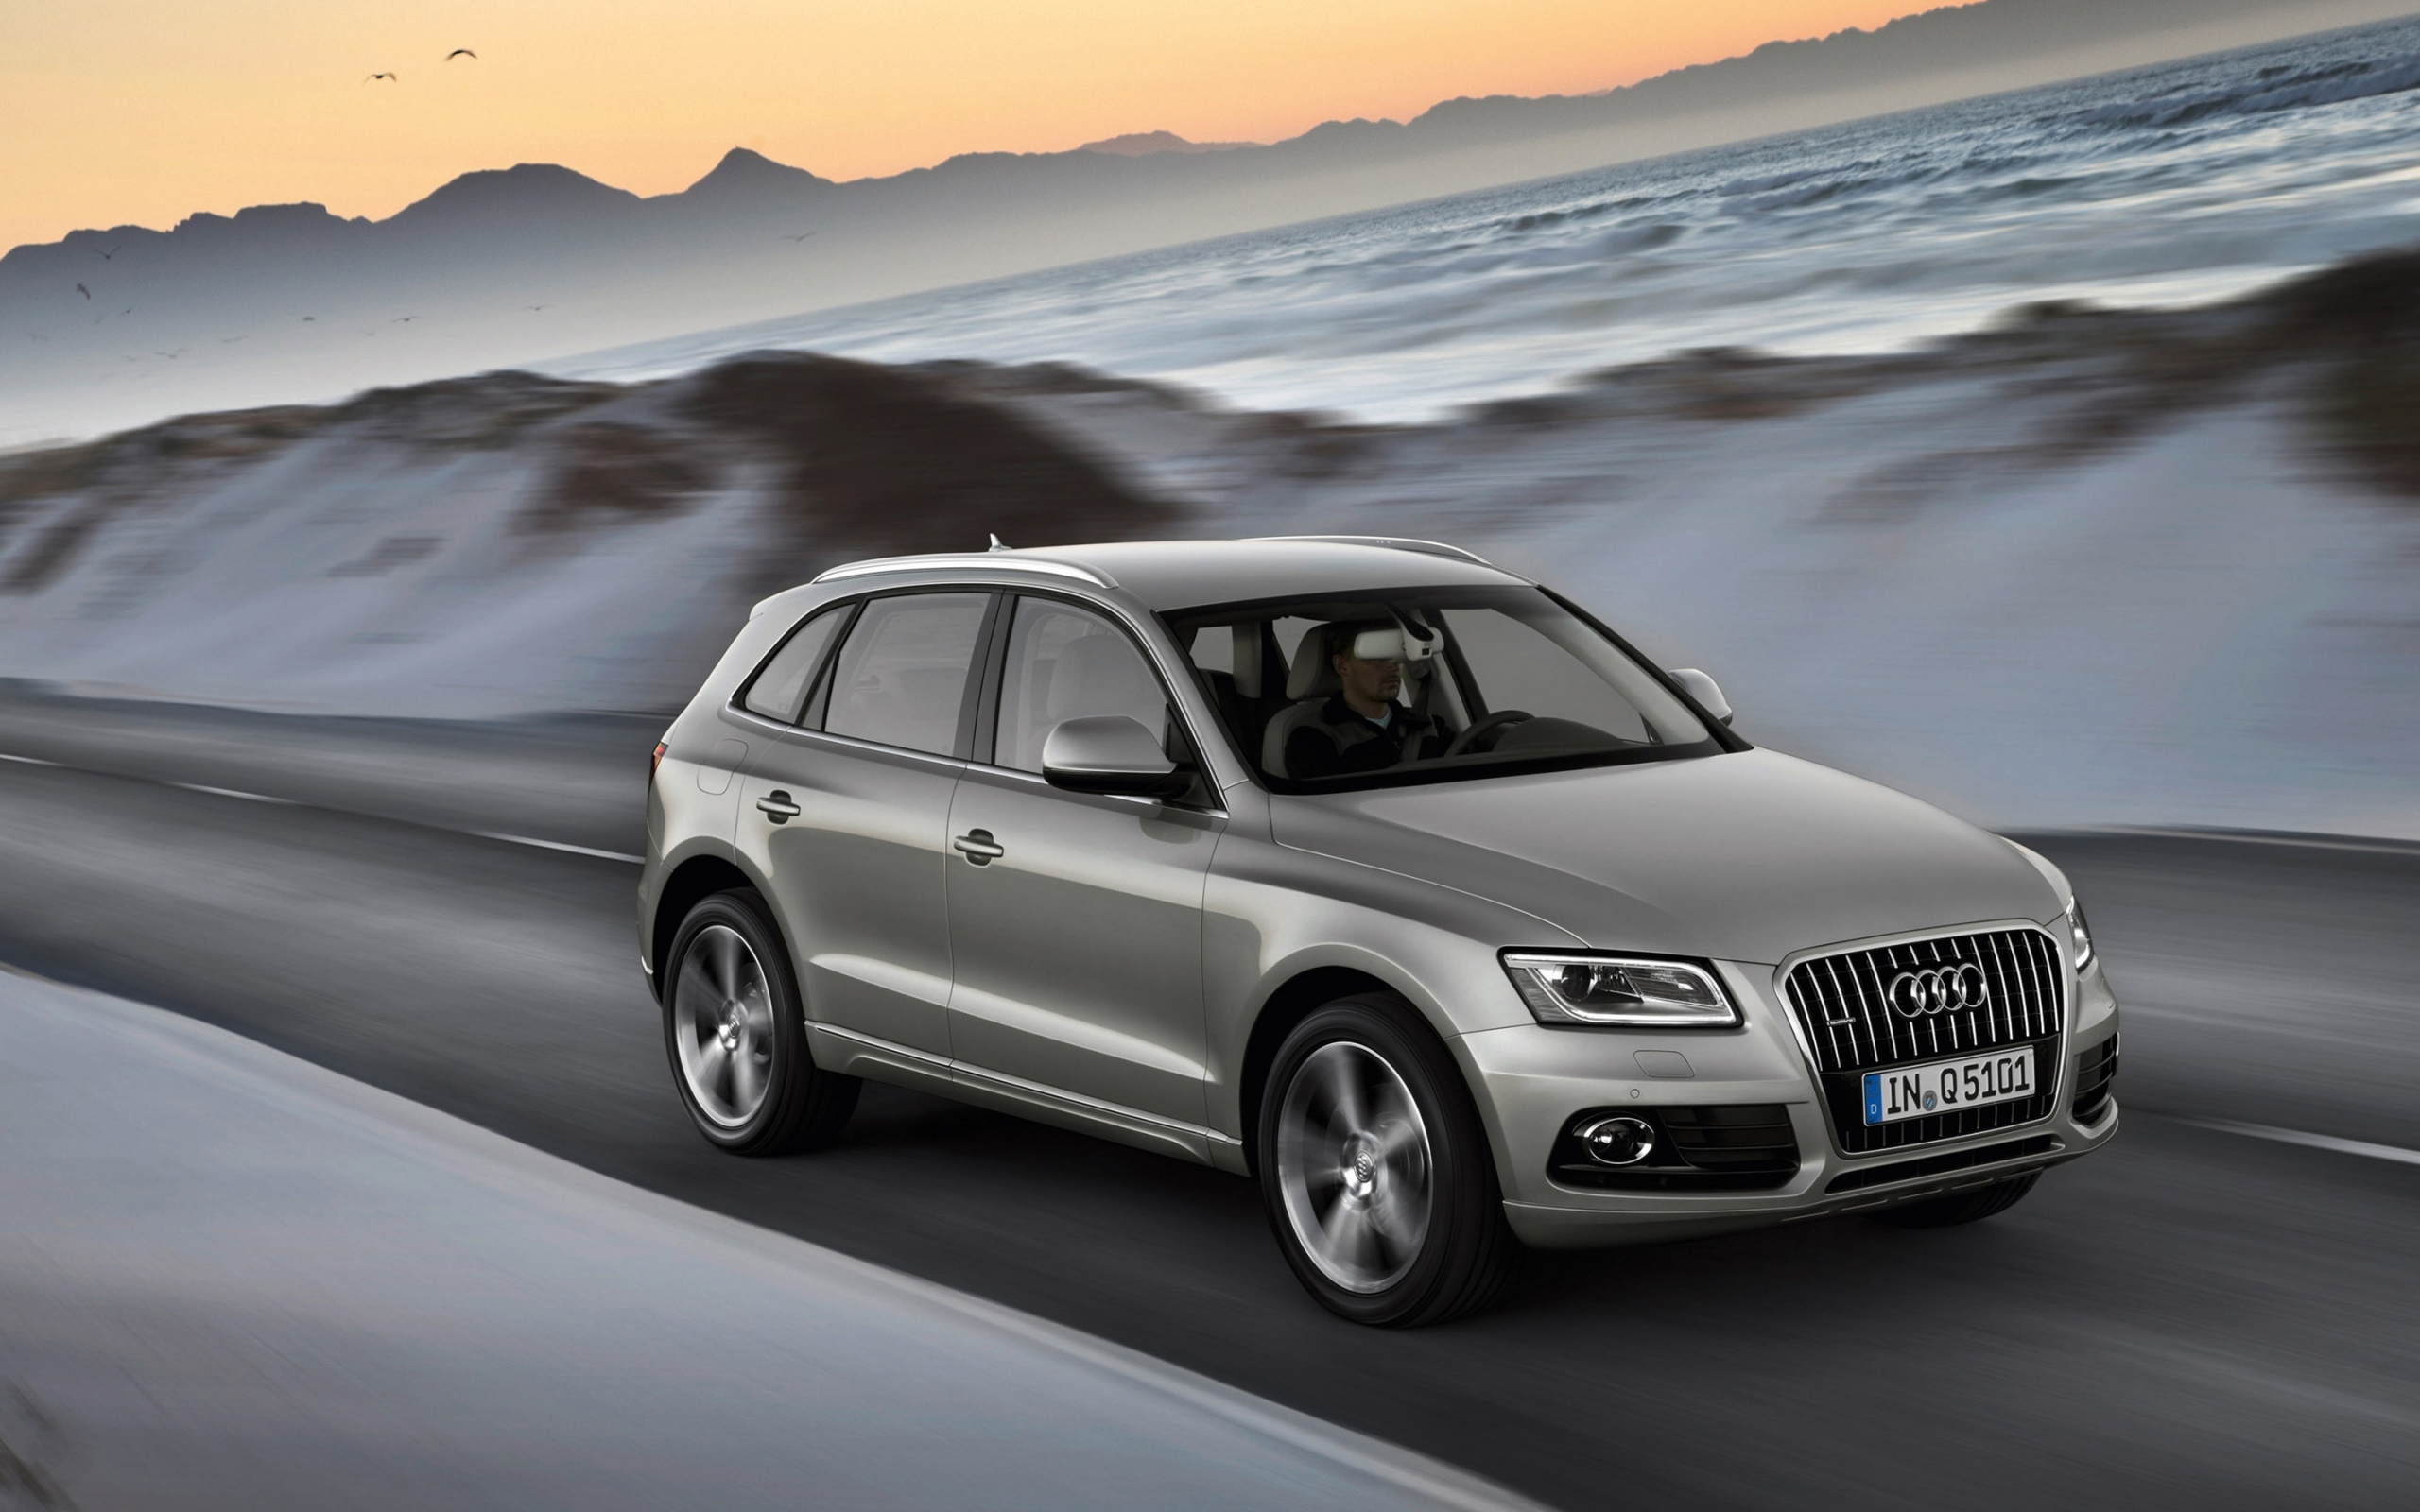 2013 Audi Q5 for 2560 x 1600 widescreen resolution